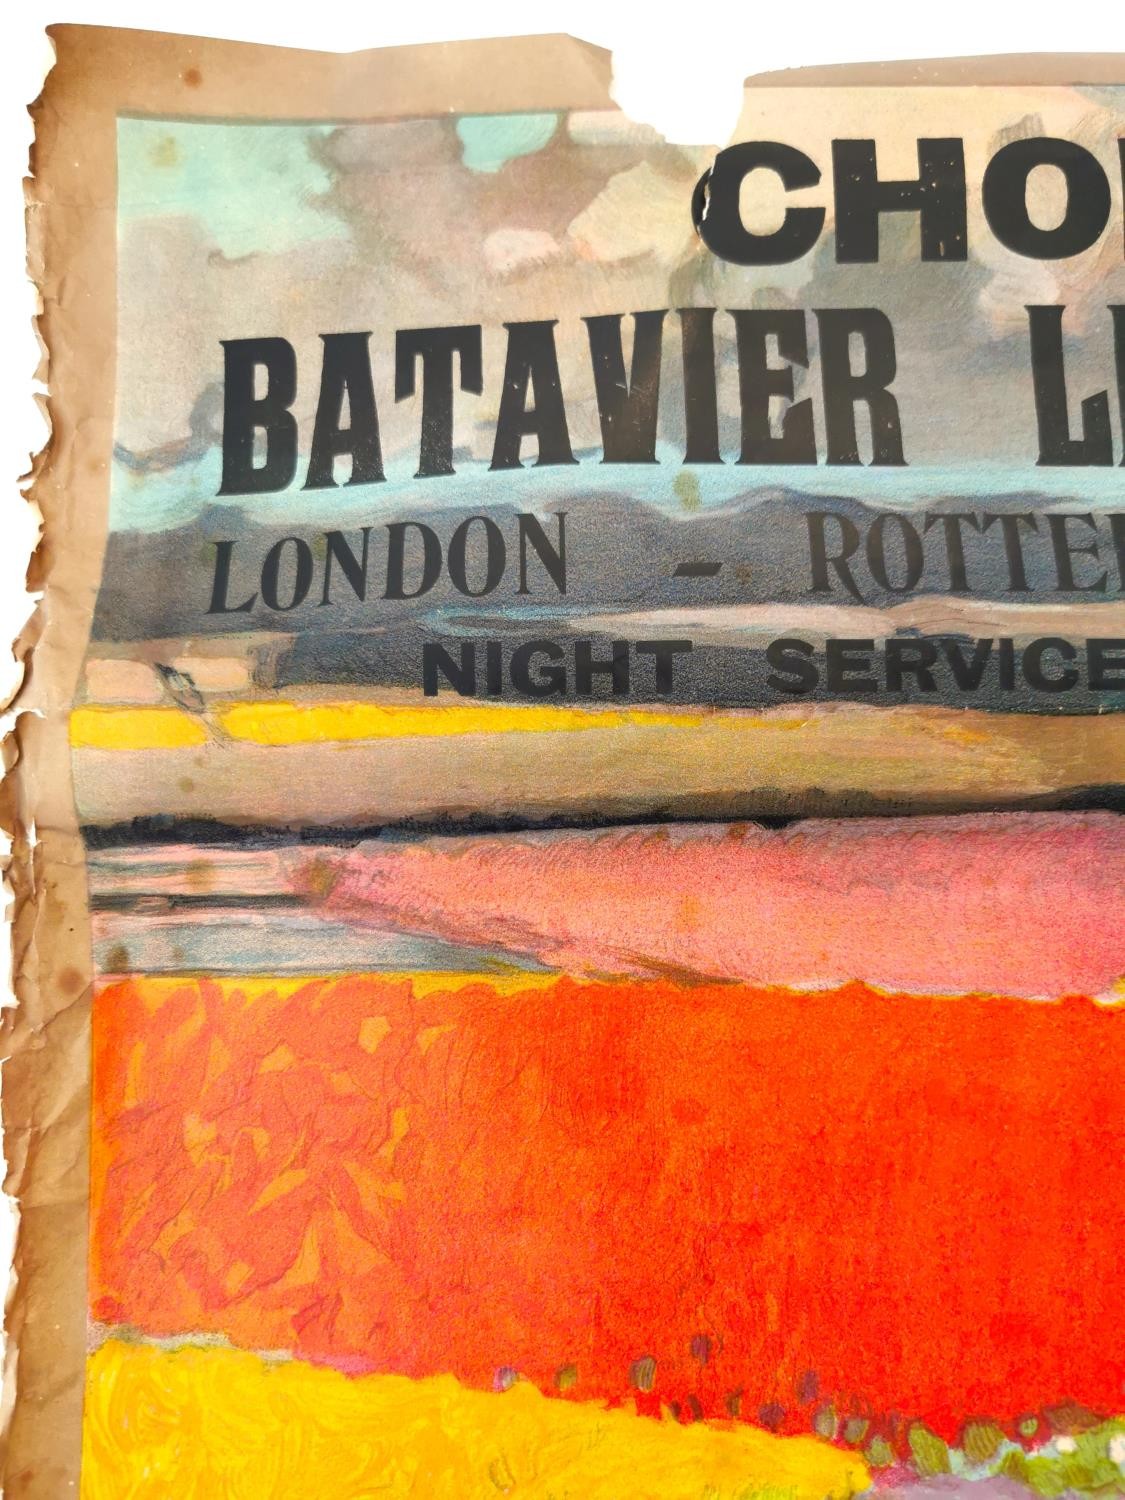 After Joseph Rovers (1893-1976), early 20th century travel poster advertising canal routes, Batavier - Image 5 of 6